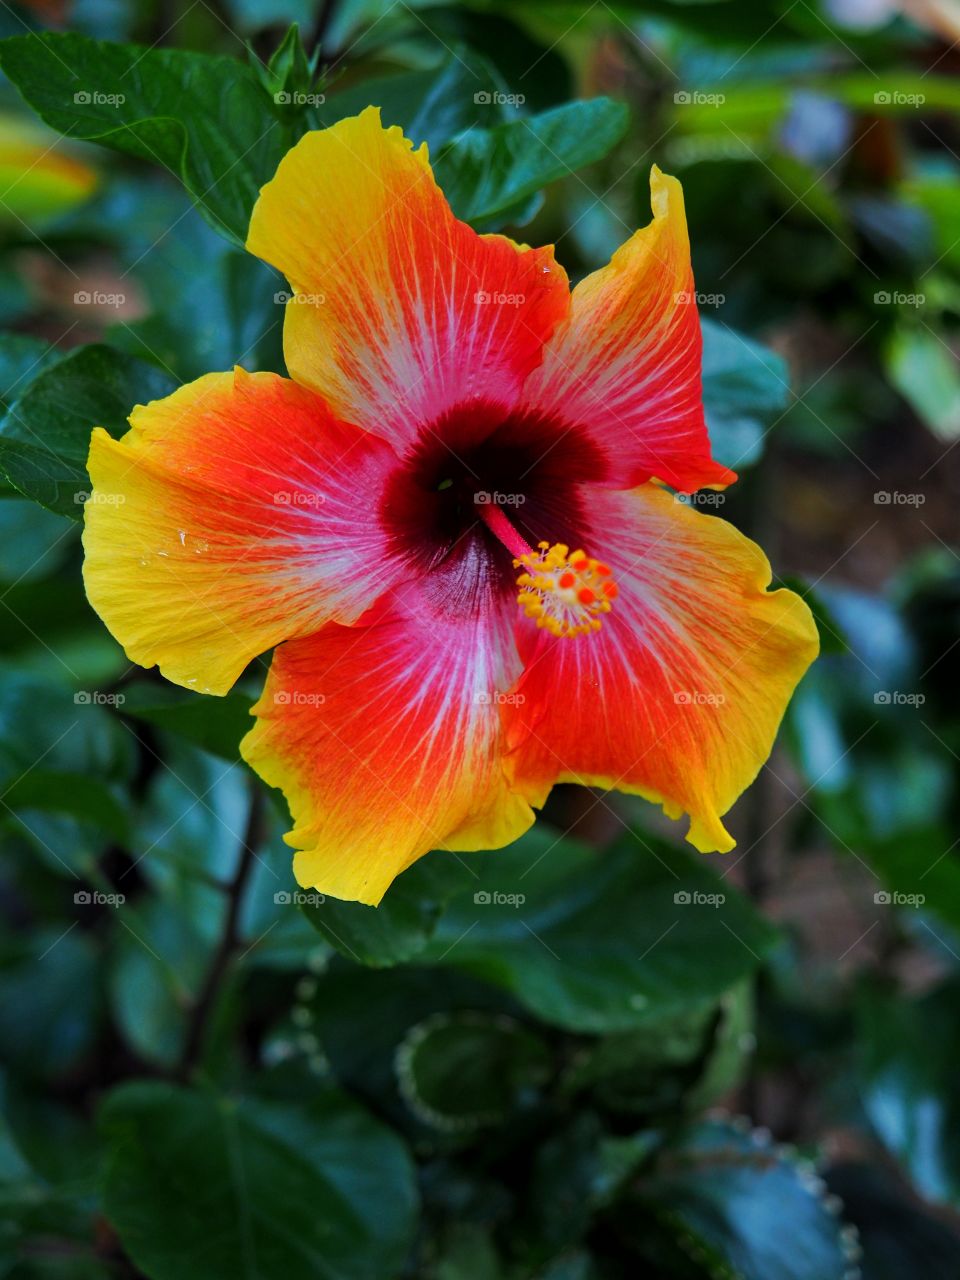 Colorful hibiscus flower blooming outdoors